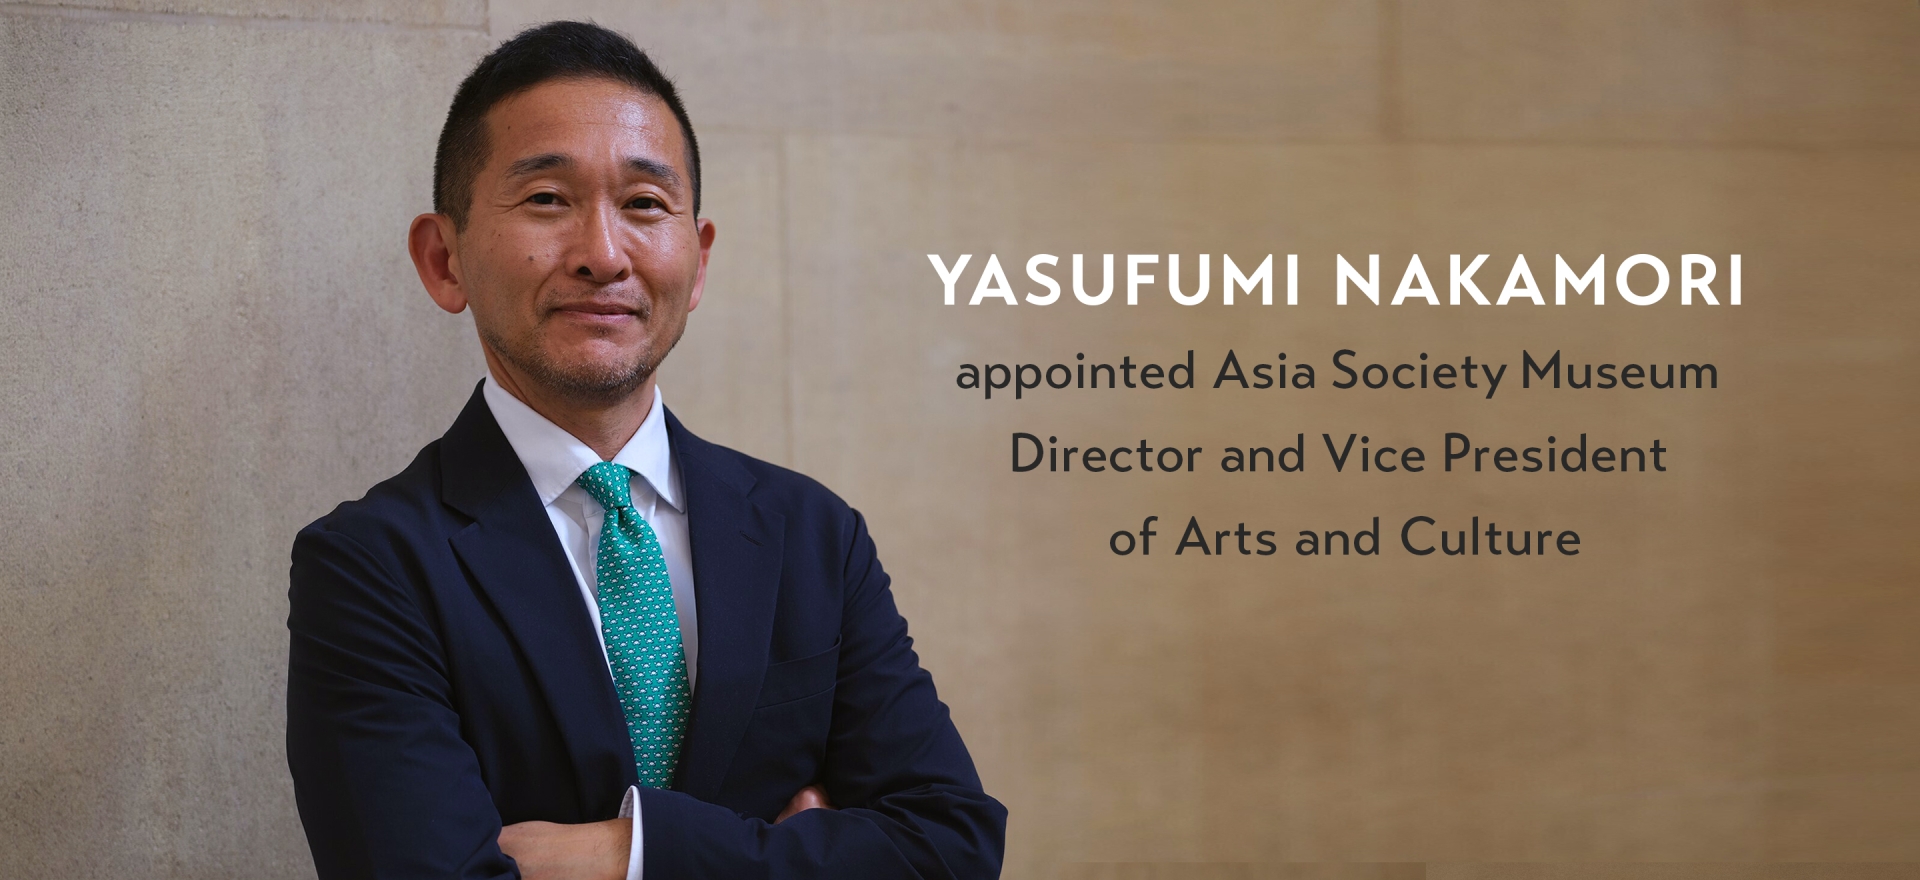 Photograph of an Asian man in a suit, next to text reading Yasufumi Nakamori named Asia Society Museum Director and Vice President of Arts and Culture